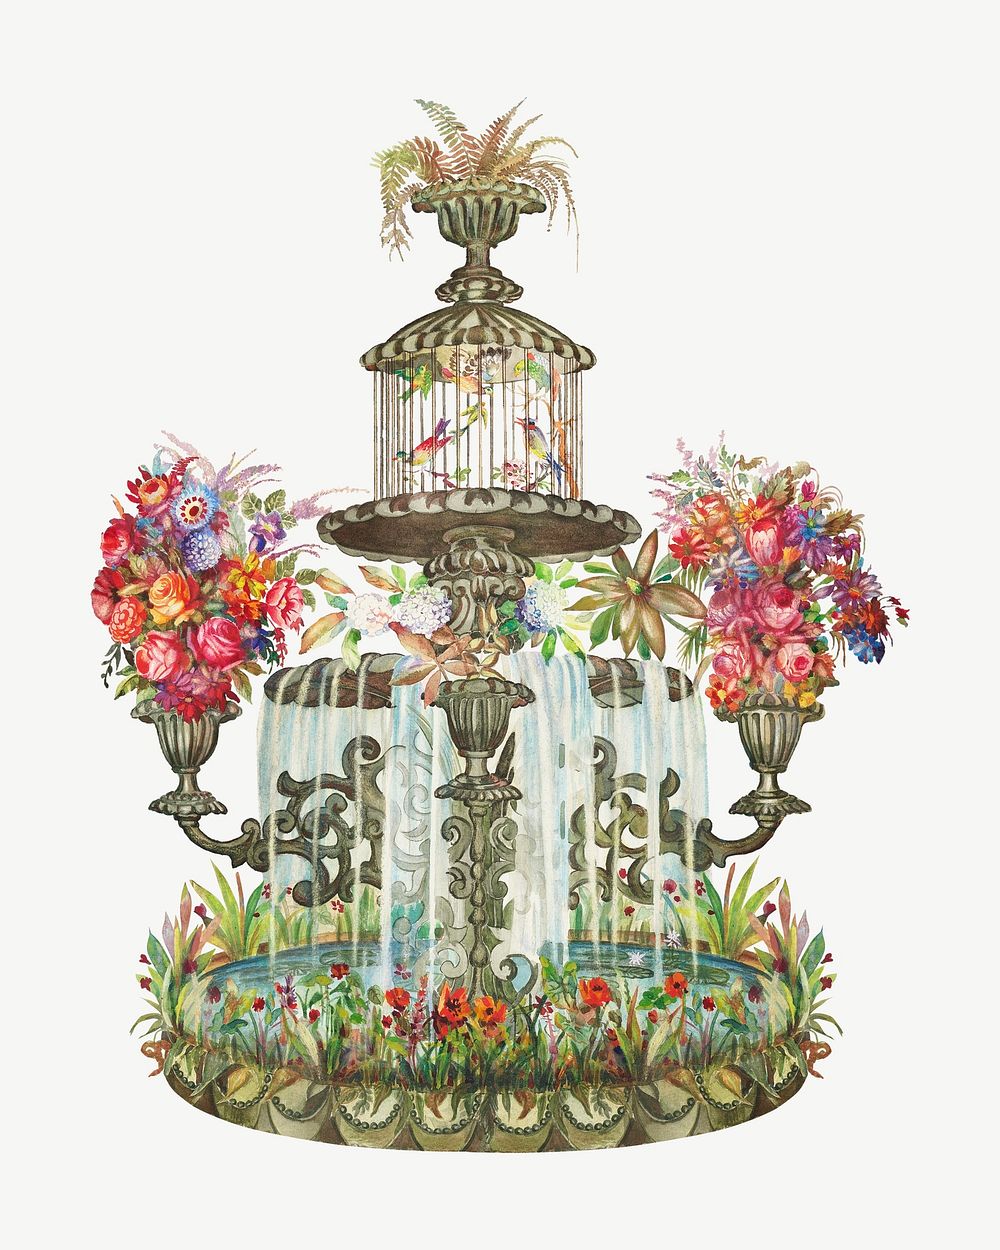 Conservatory Fountain, vintage garden illustration psd by Perkins Harnly and Nicholas Zupa. Remixed by rawpixel.